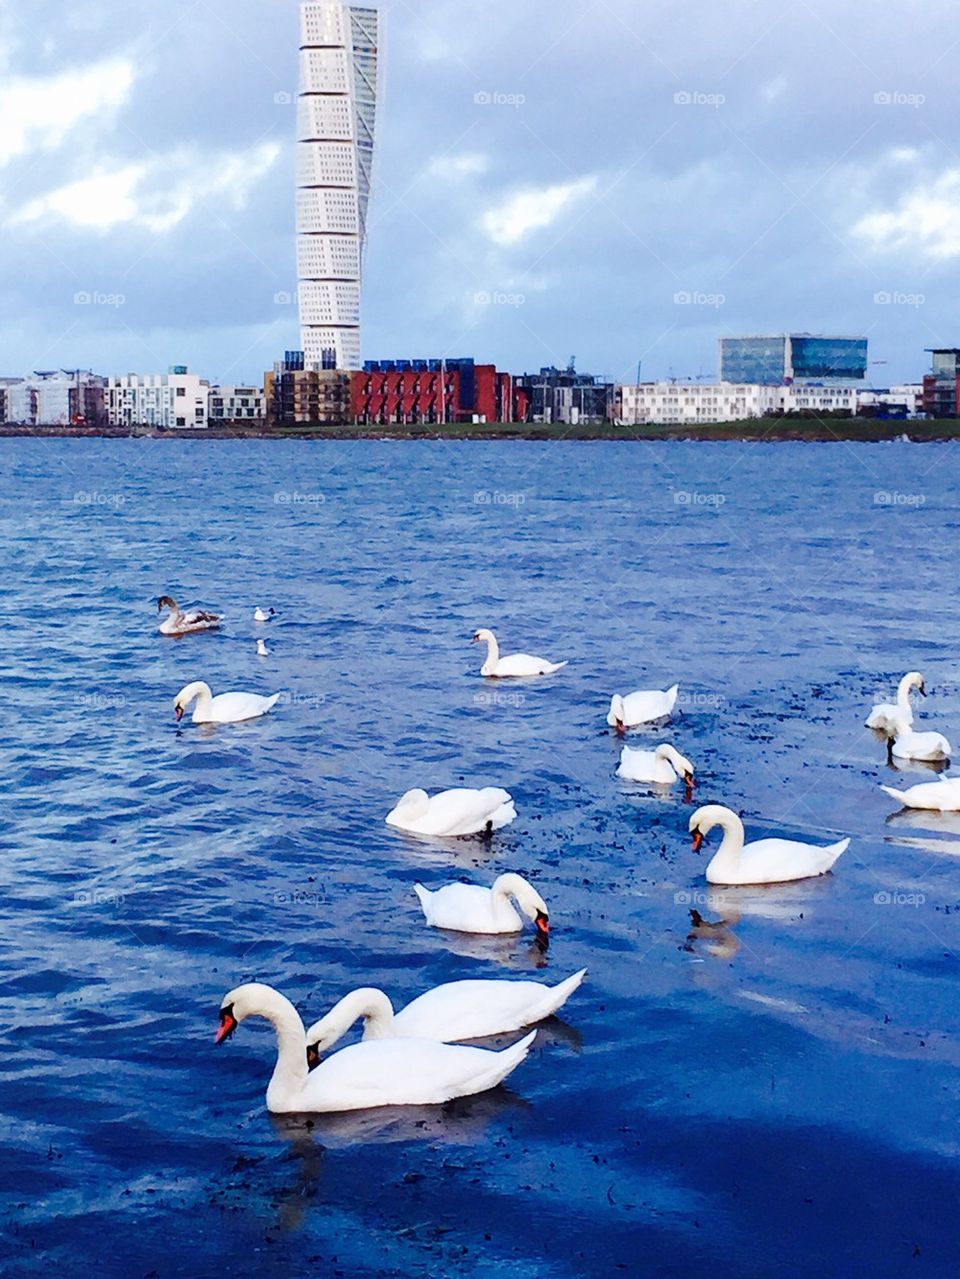 Turning Torso and lovely Swans